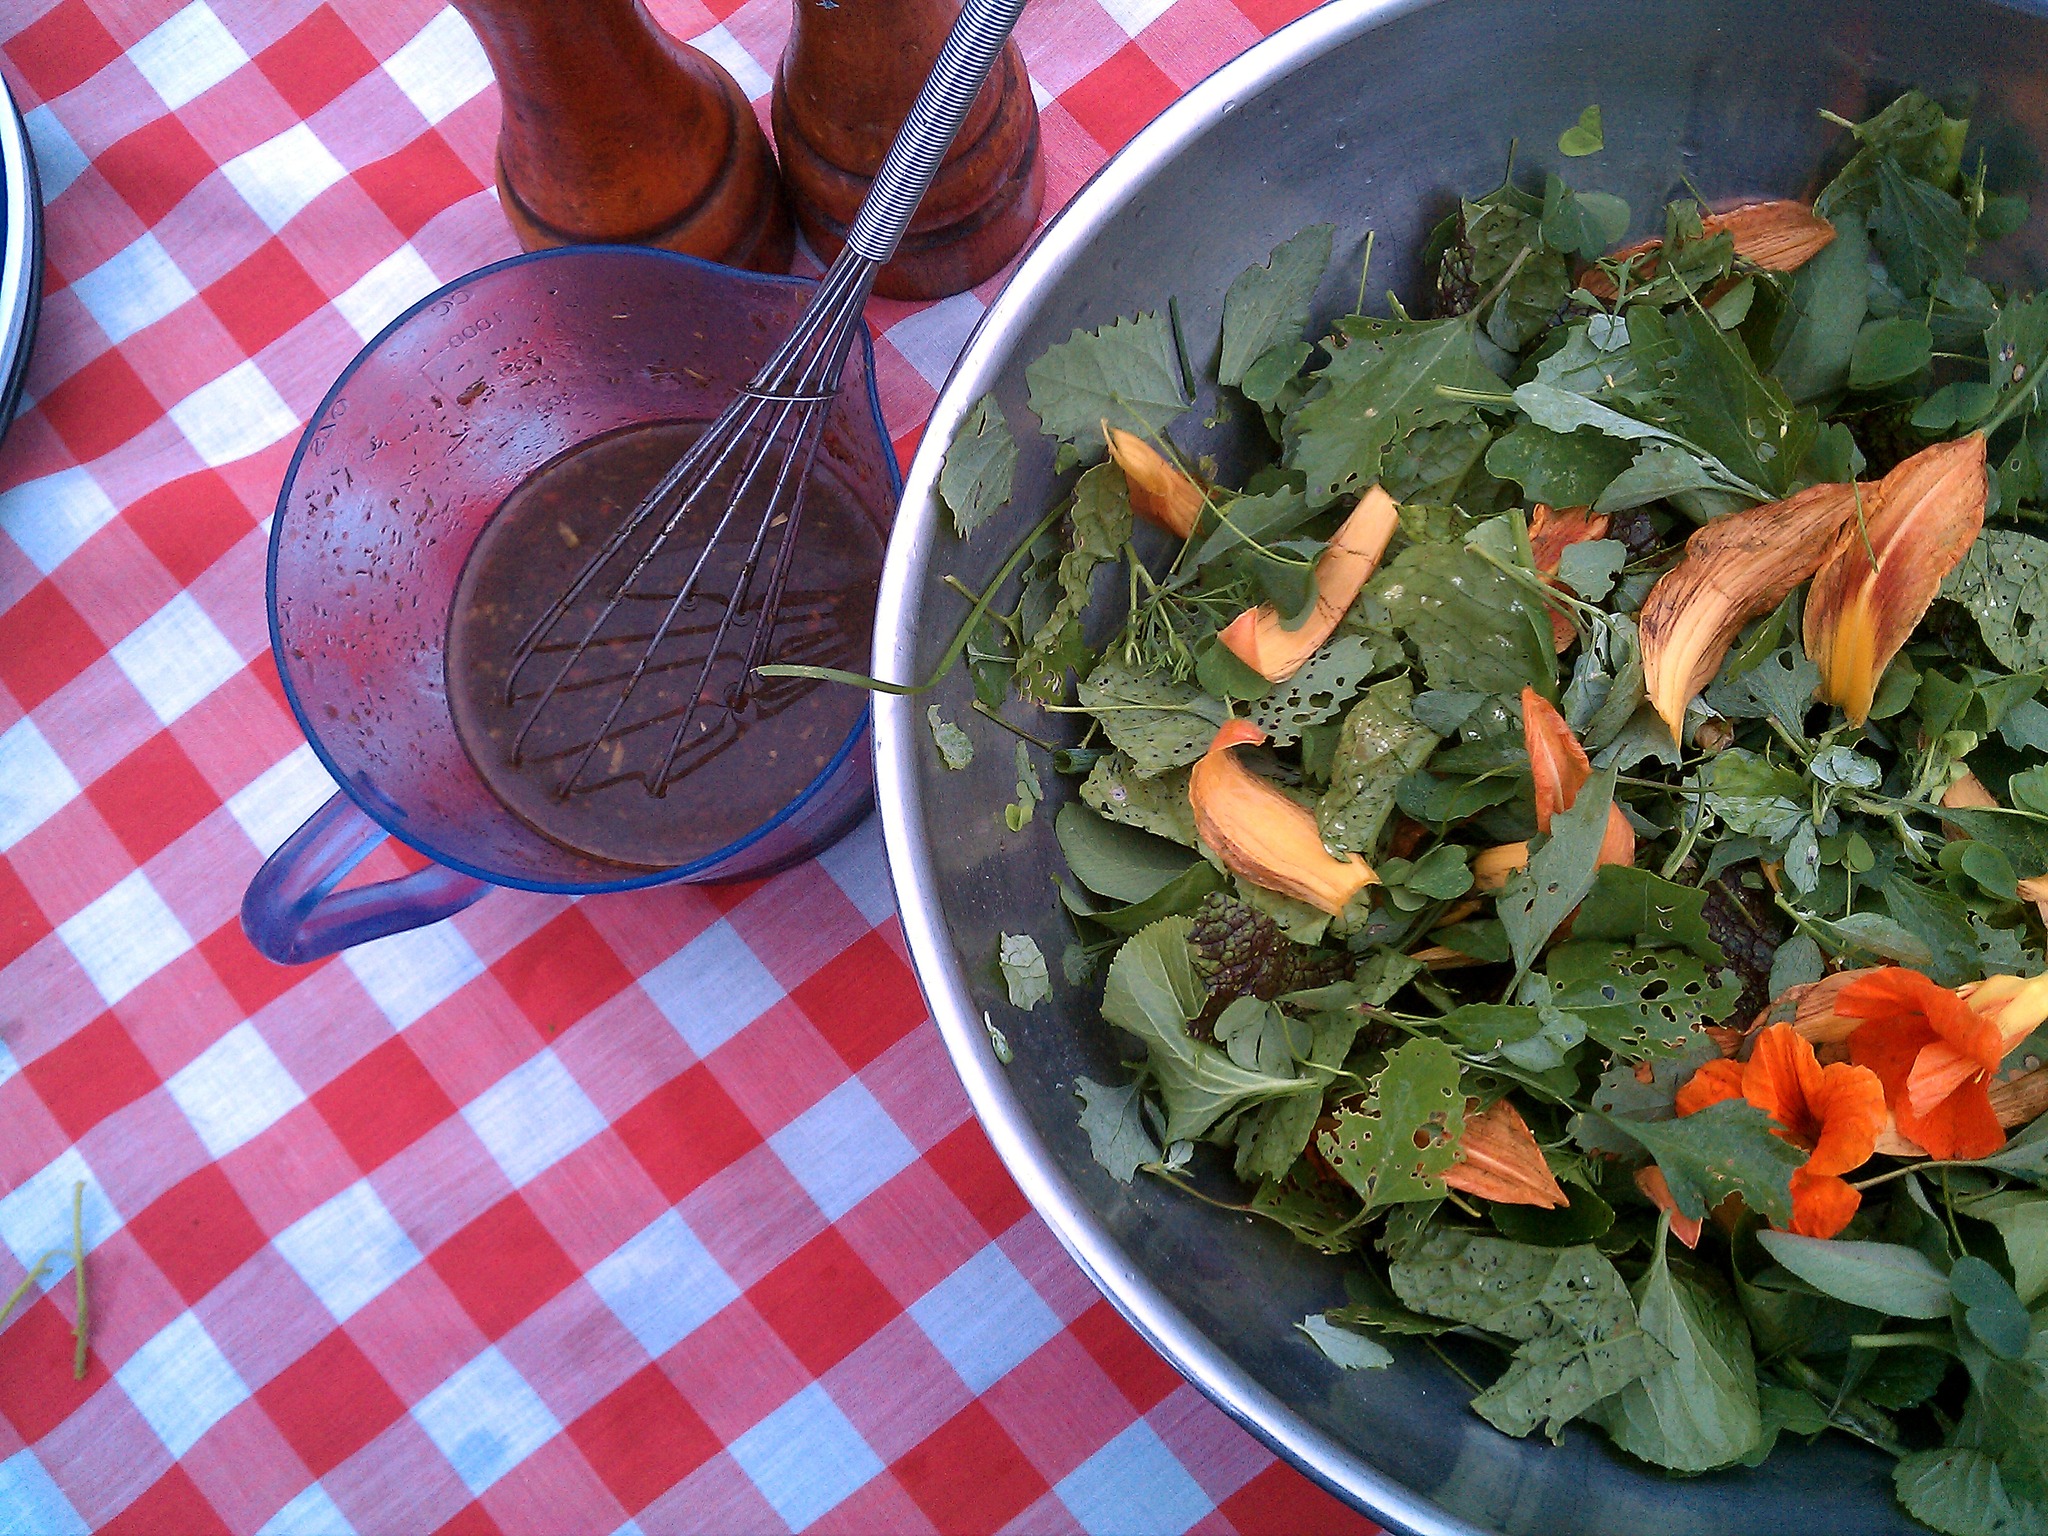 A birdâ€™s eye view of a table with a red checkered table cloth, a measuring cup with salad dressing, and a large bowl with a salad in it. The salad has edible flowers in it. Photo from the Delight Flower Farm foraging event page.